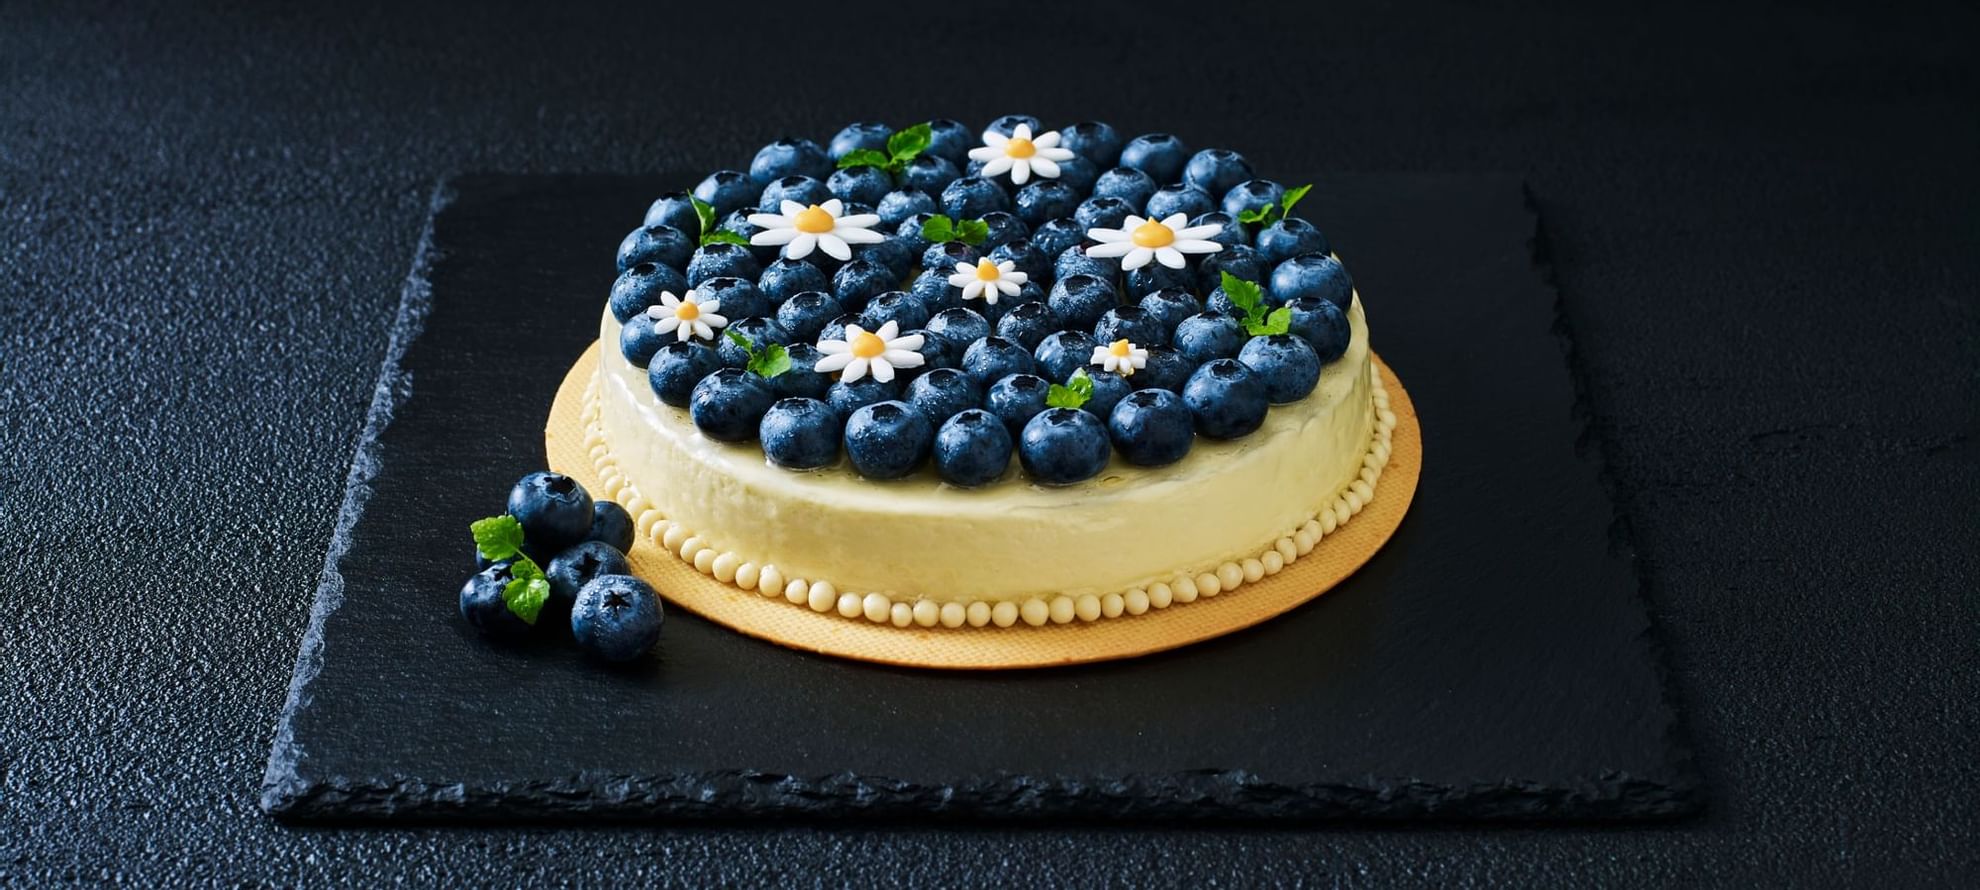 A Blueberry Philly Cheesecake served at Fullerton Sydney